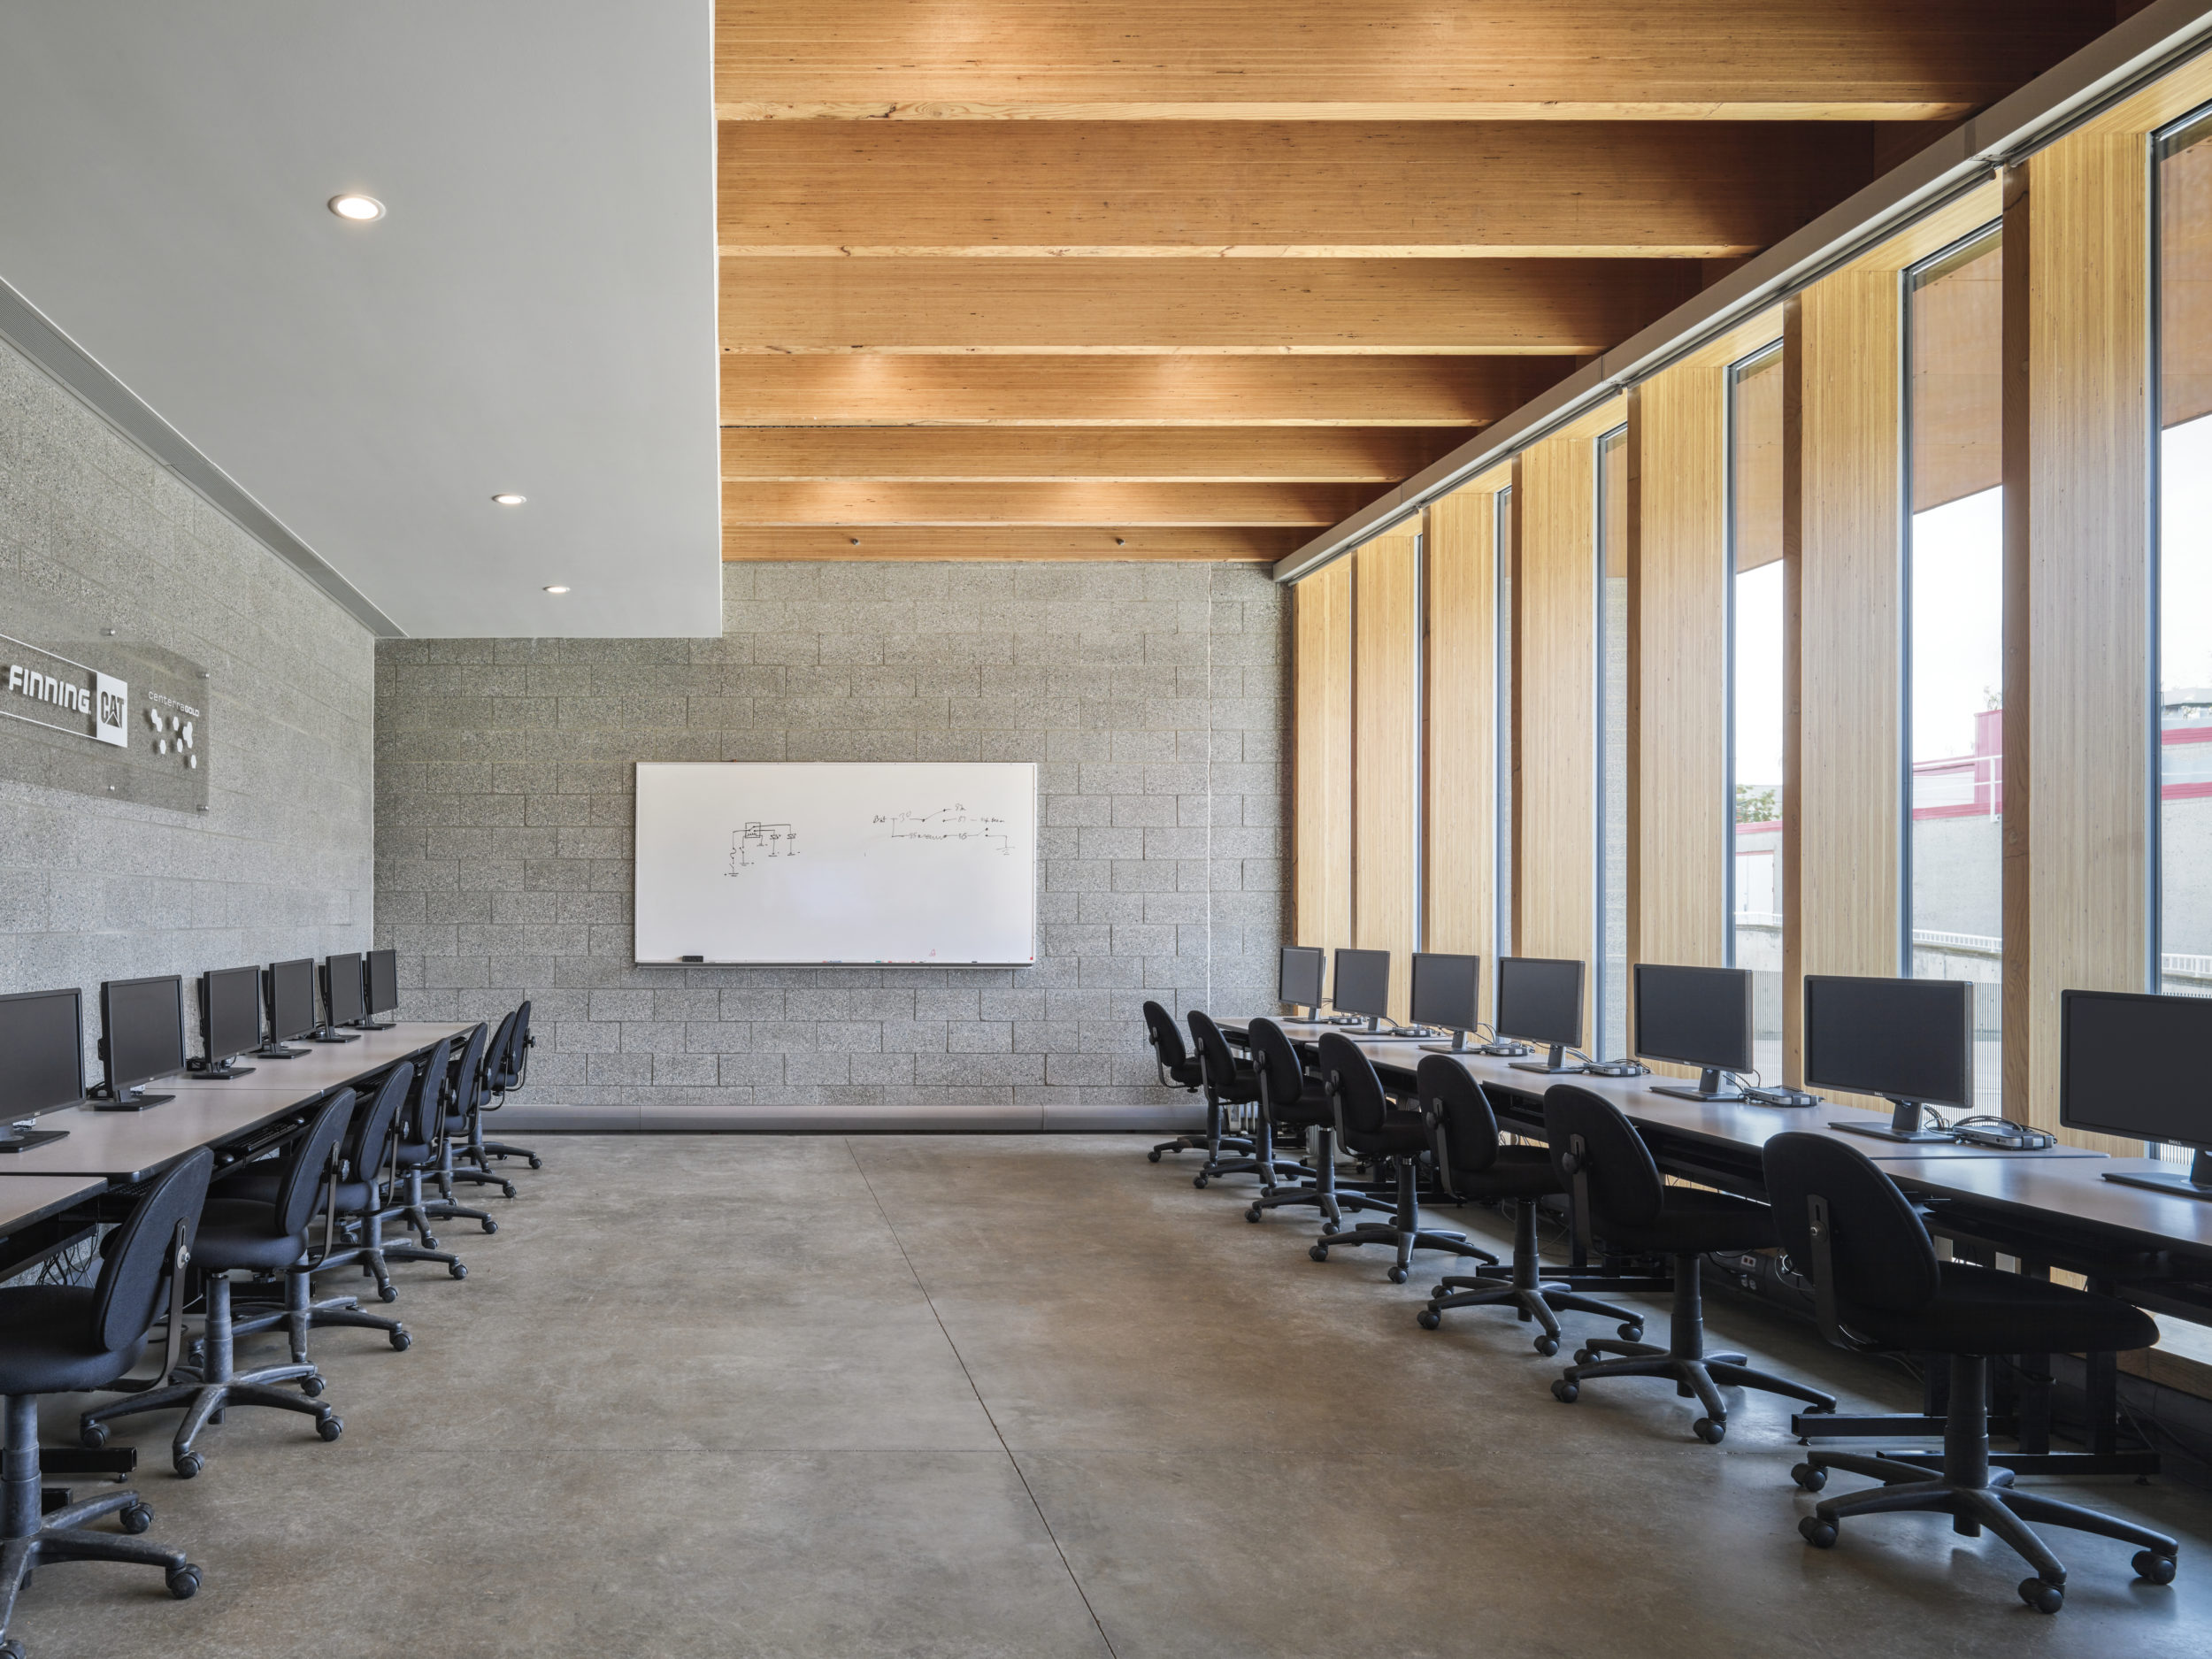 office of mcfarlane biggar architects + designers, Prince George, British Columbia, Canada, College of New Caledonia Heavy Mechanical Trades Training Facility